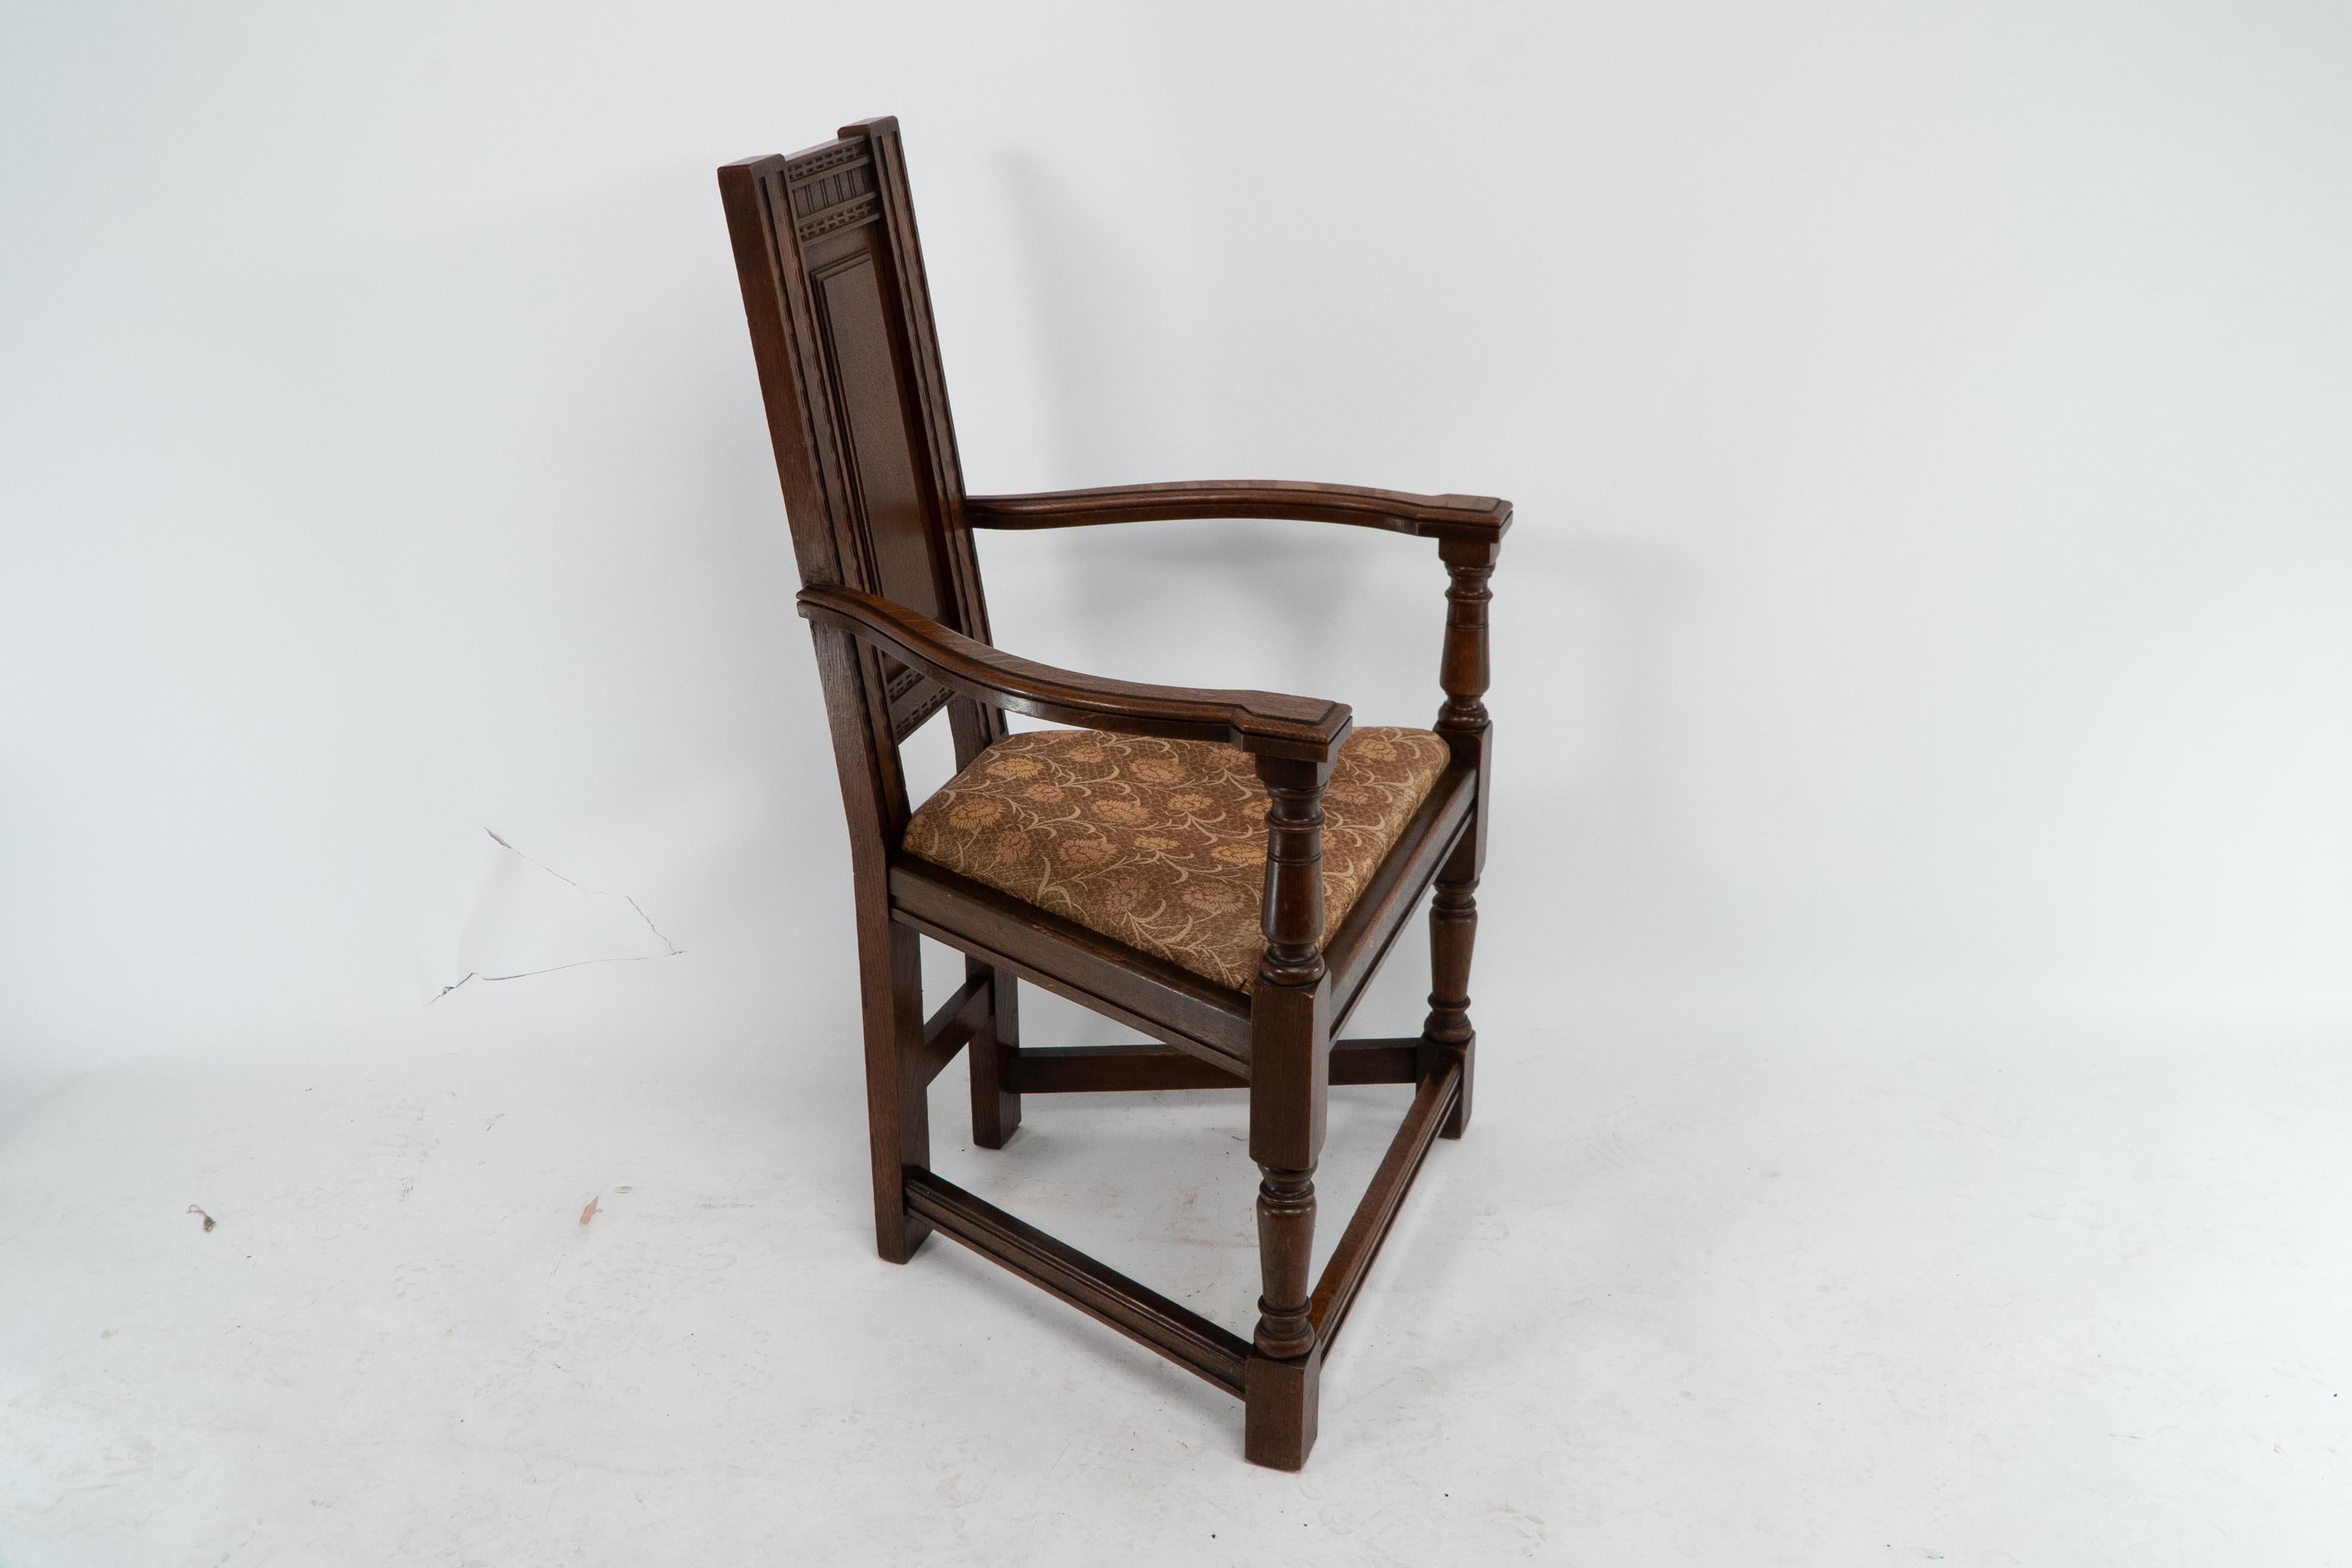 Aesthetic Movement E W Godwin for William Watt. An oak Shakespeare armchair. One of only four known For Sale